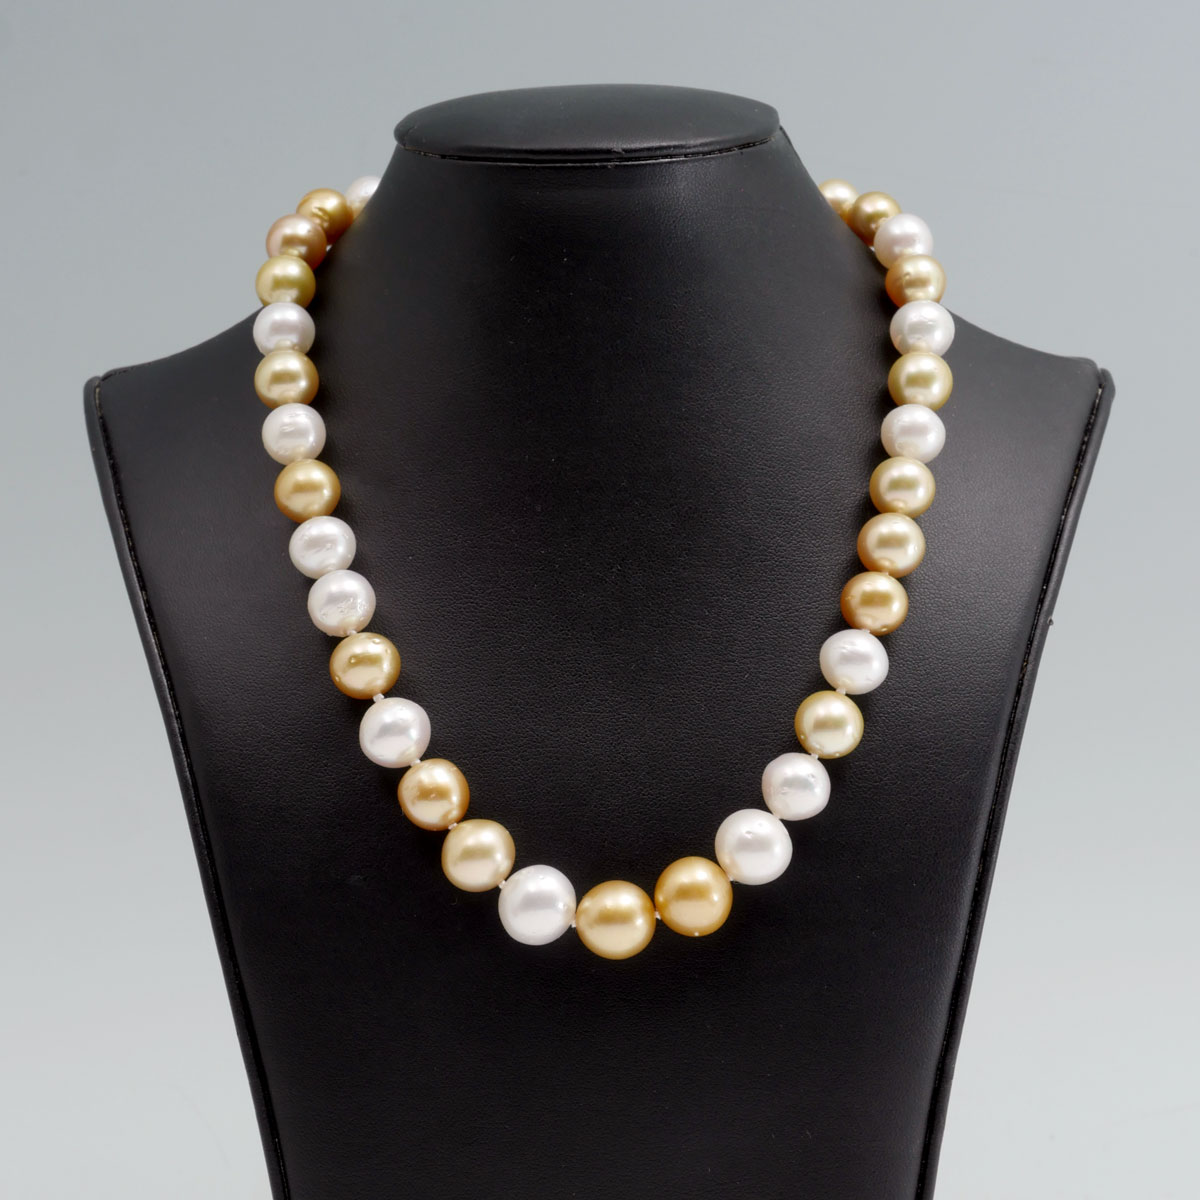 WHITE GOLD SOUTH SEA PEARL NECKLACE  27687b